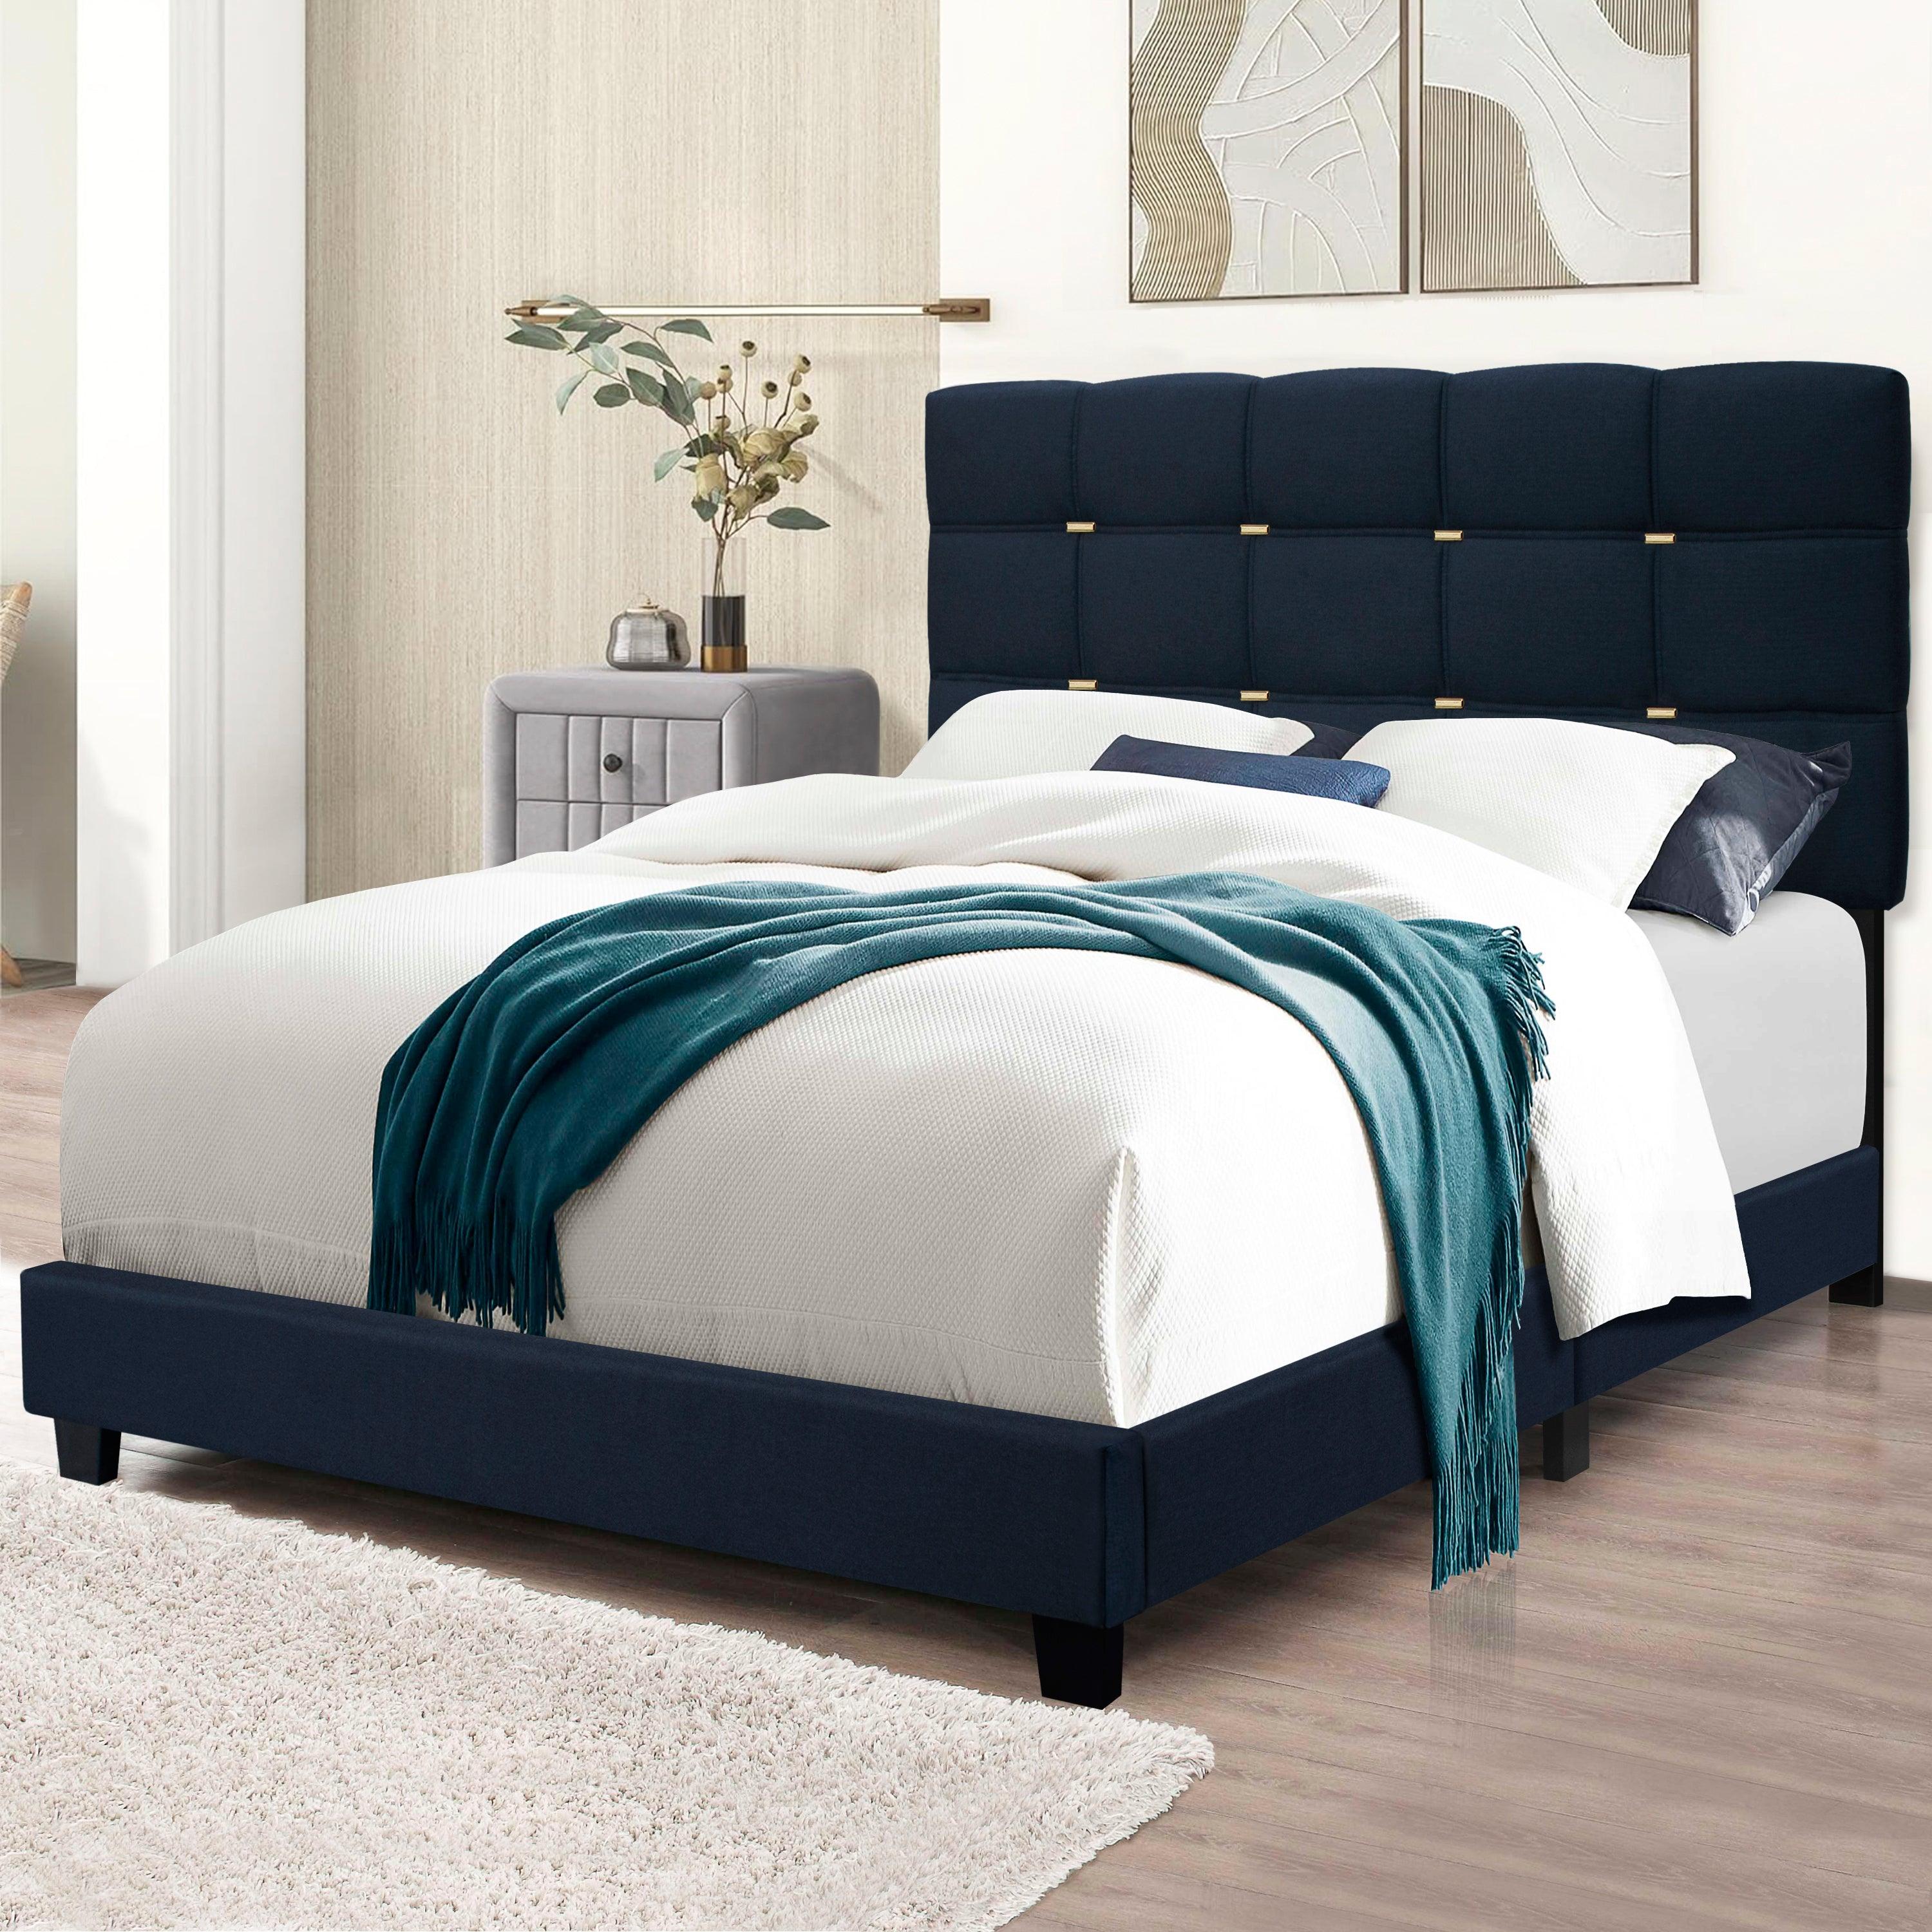 🆓🚛 The Black Series Queen Size Adjustable Upholstered Bed Frame With Gold Accents on The Headboard Has An Elegant Look and Requires no Springs!